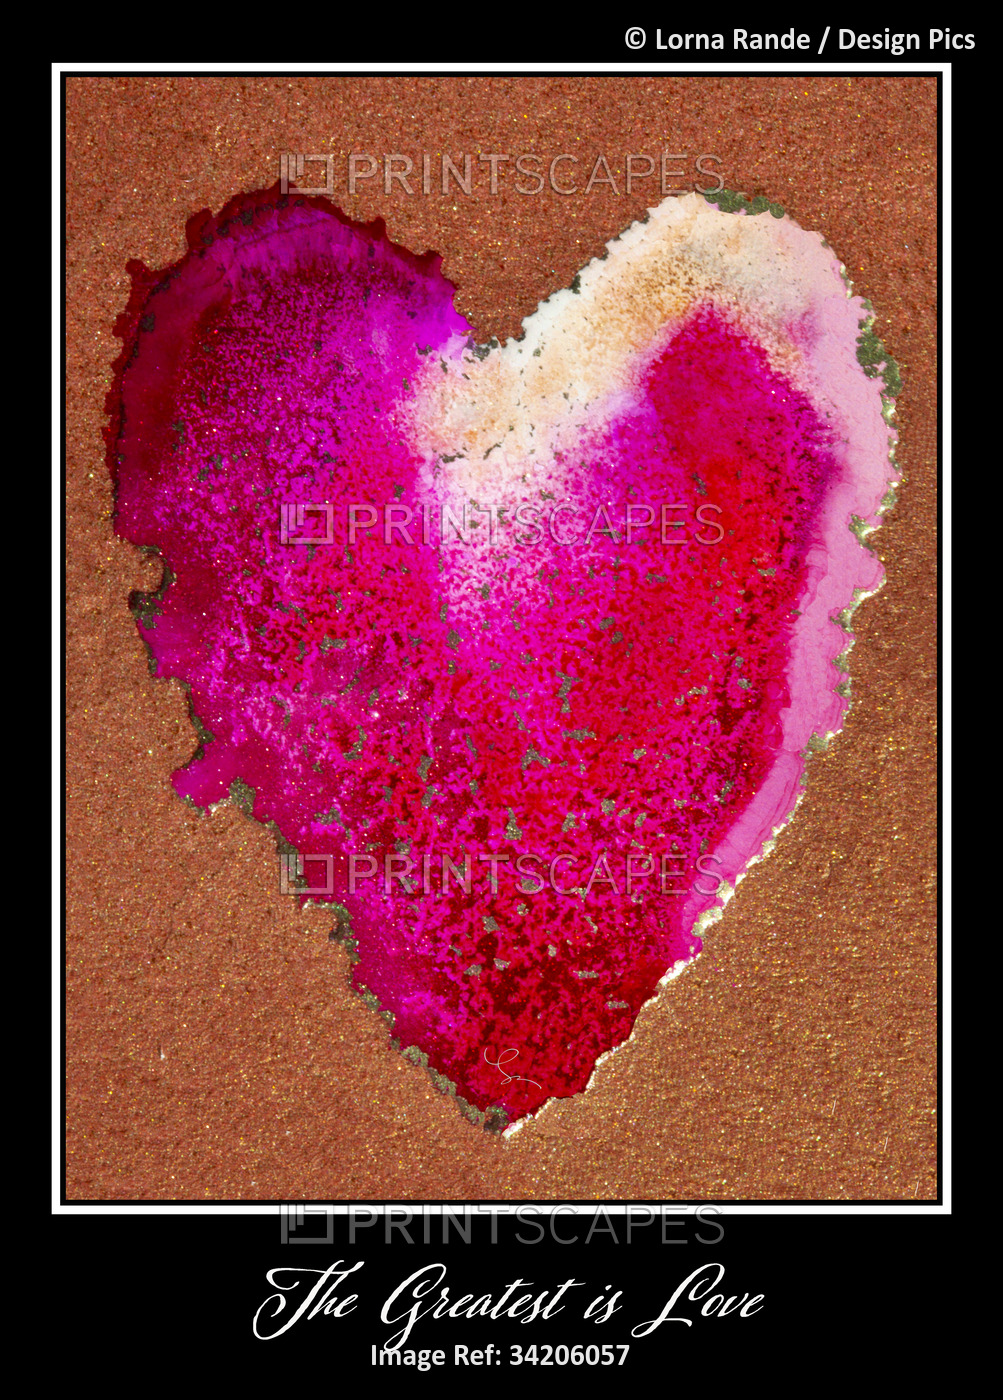 Christian art, ink in a heart shape with the words 'The Greatest is Love'; ...